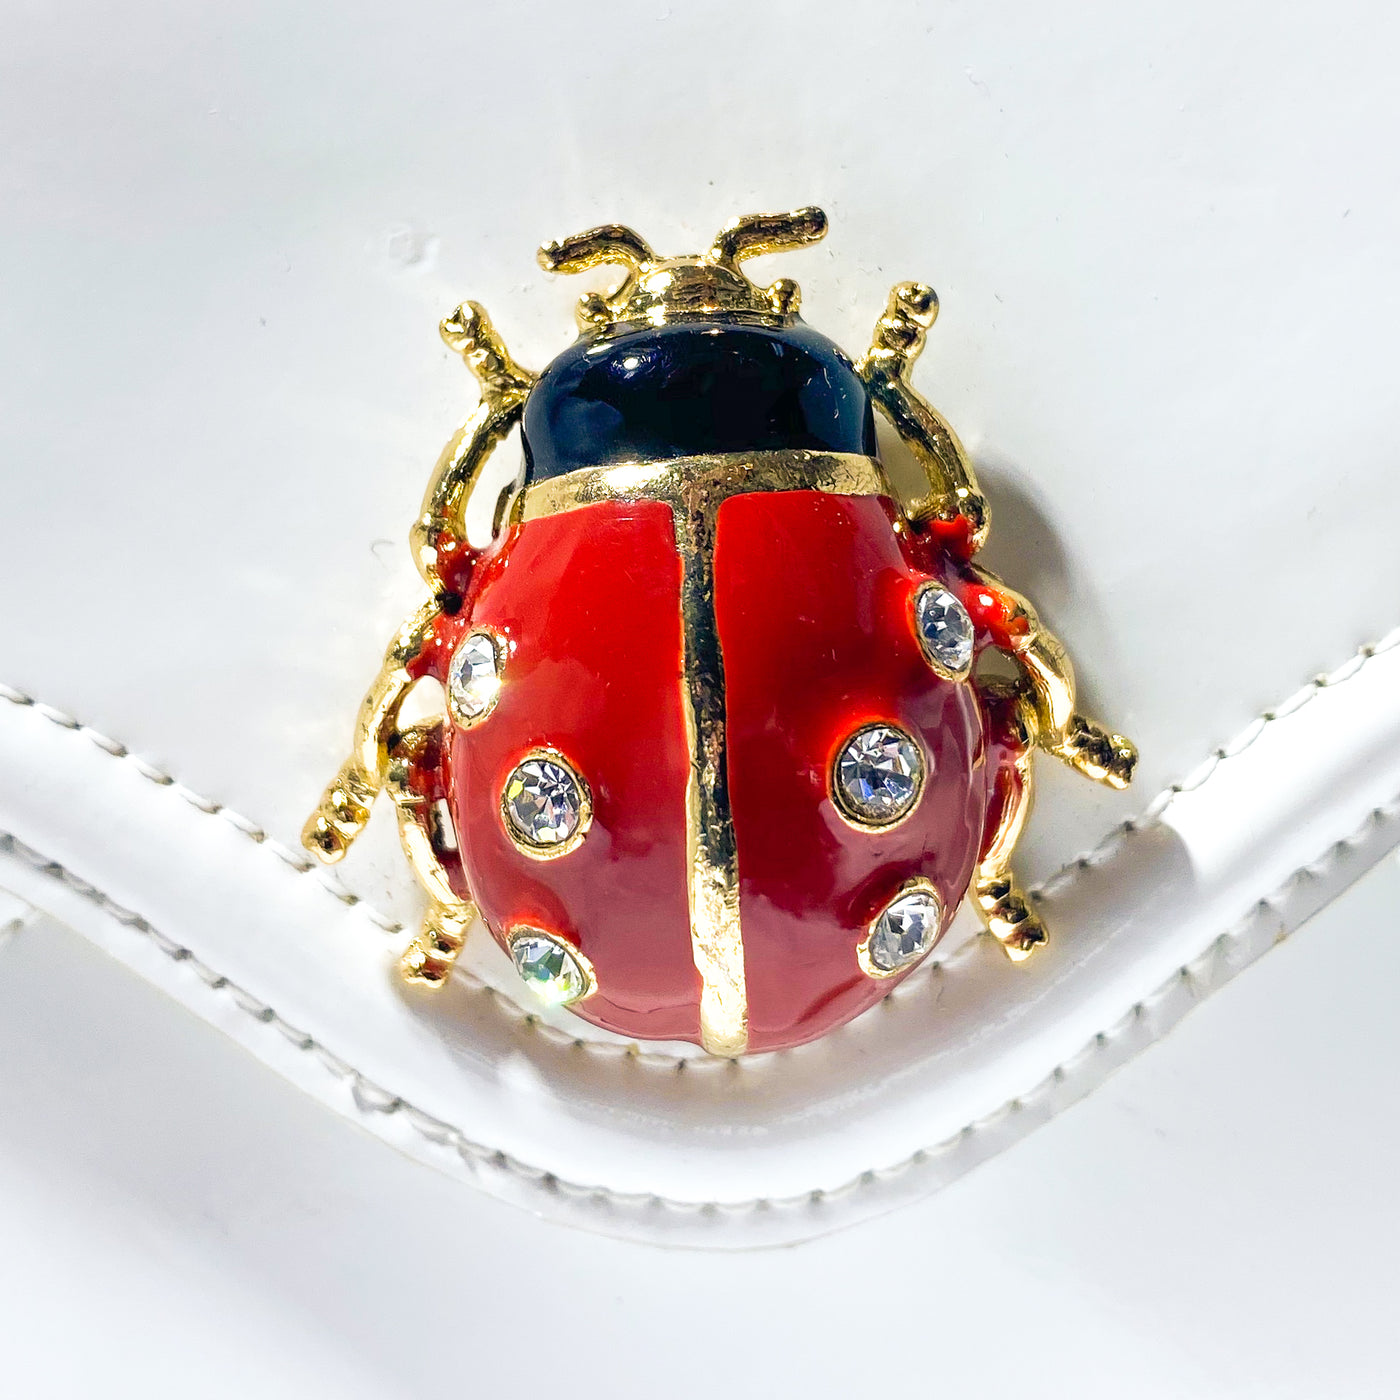 Kenneth Jay Lane White Patent Leather Lady Bug Purse with Gold